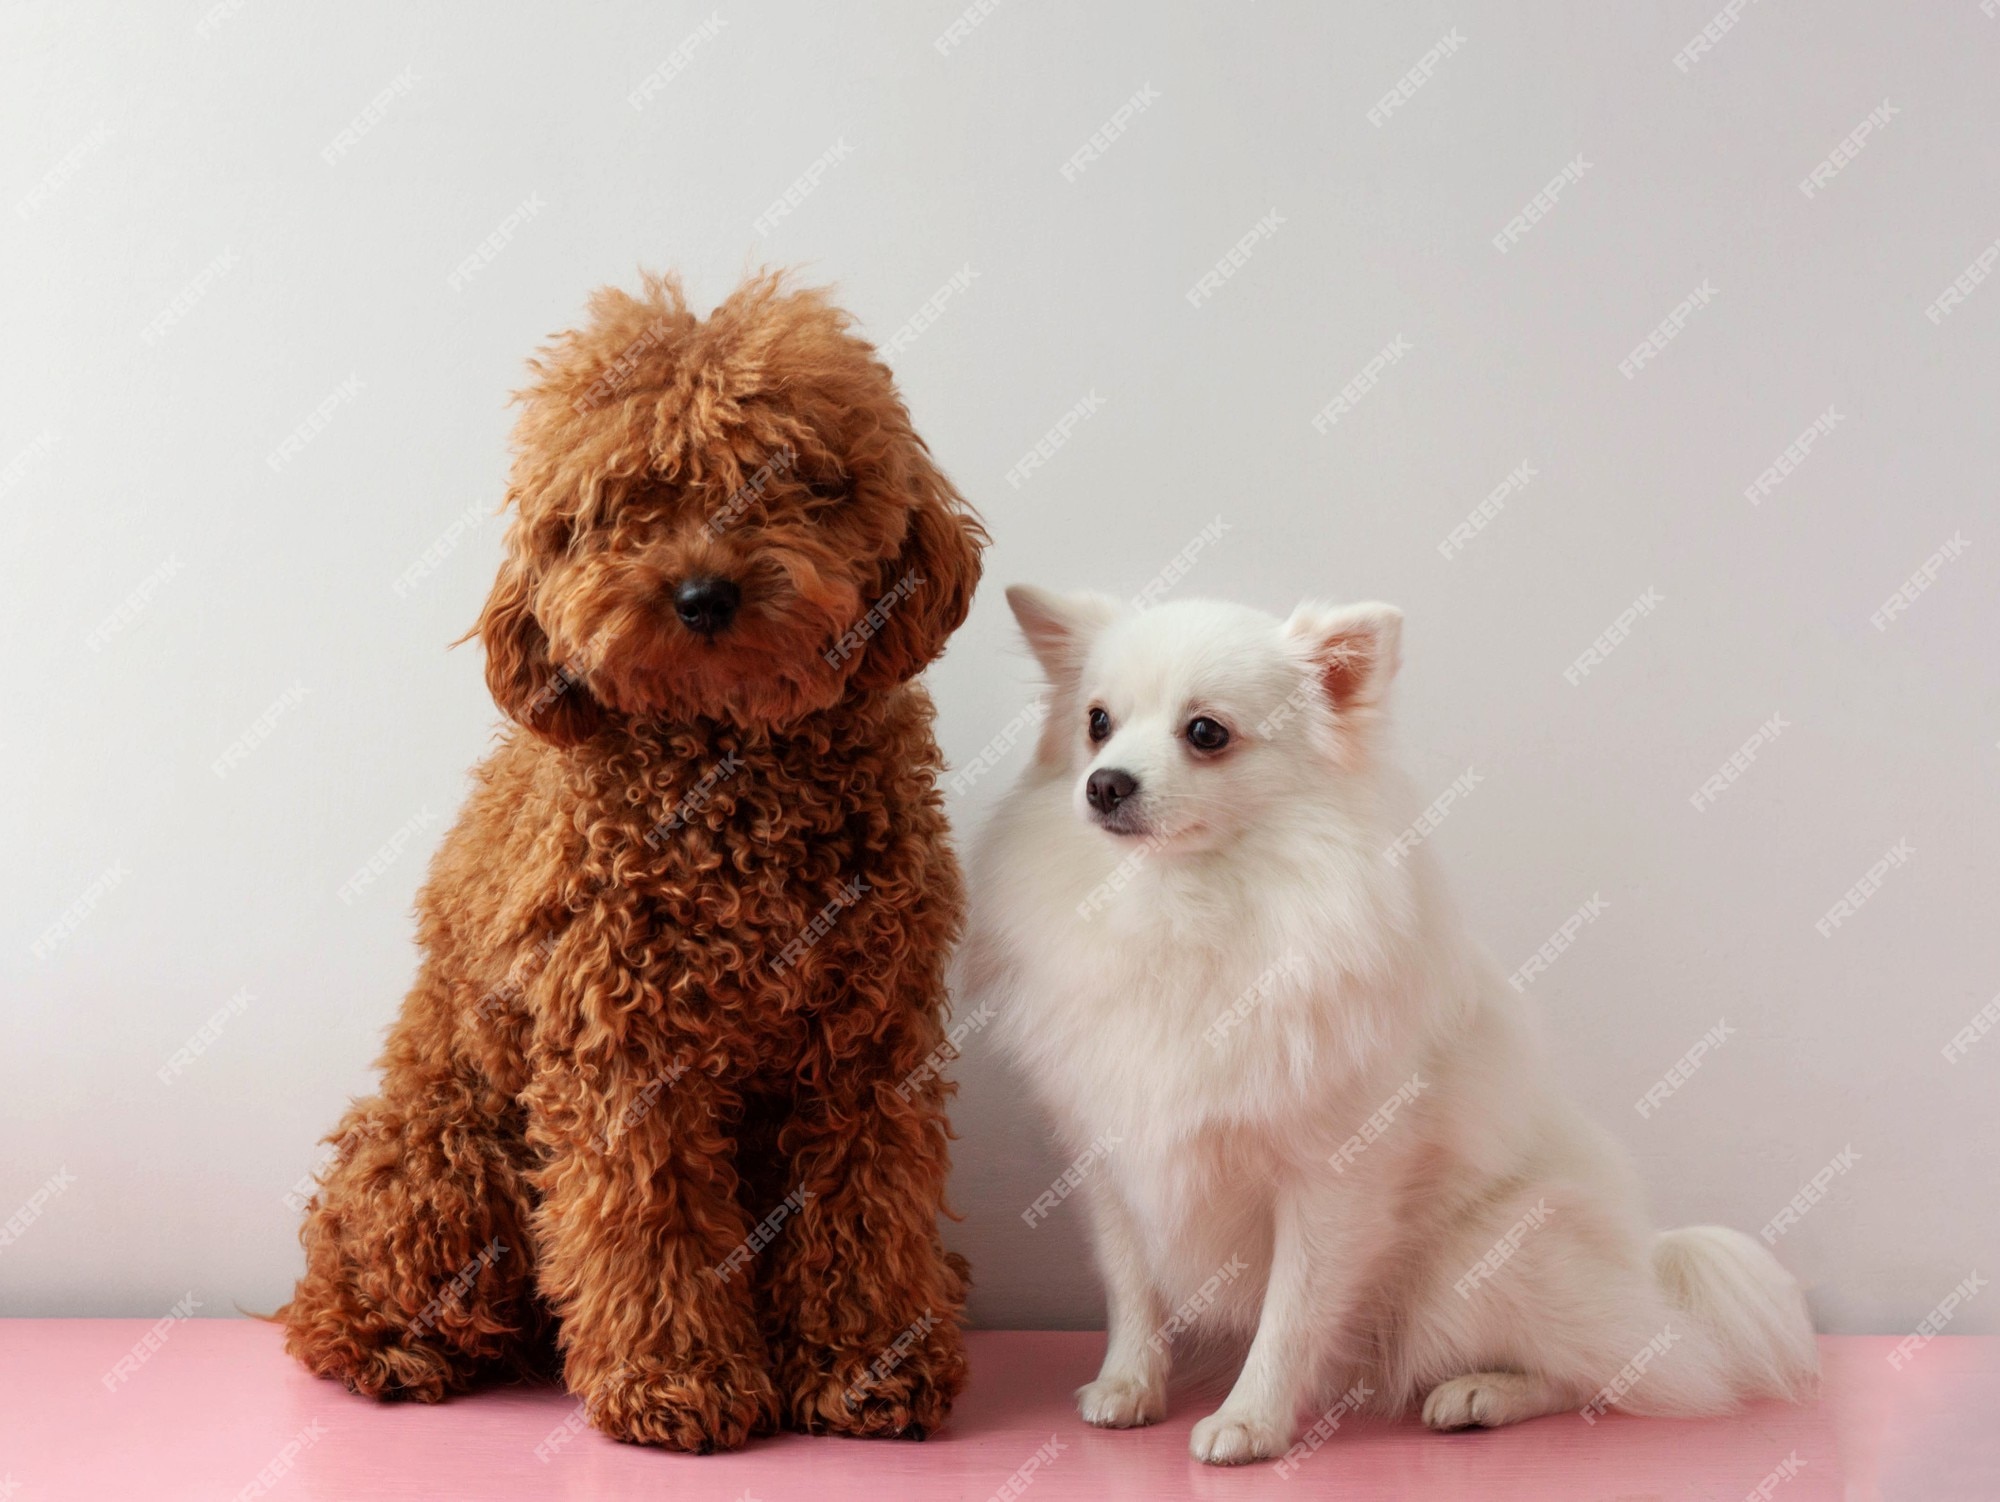 Premium Photo | Two small dogs a white pomeranian and a shaggy miniature  poodle toy are sitting next to each other